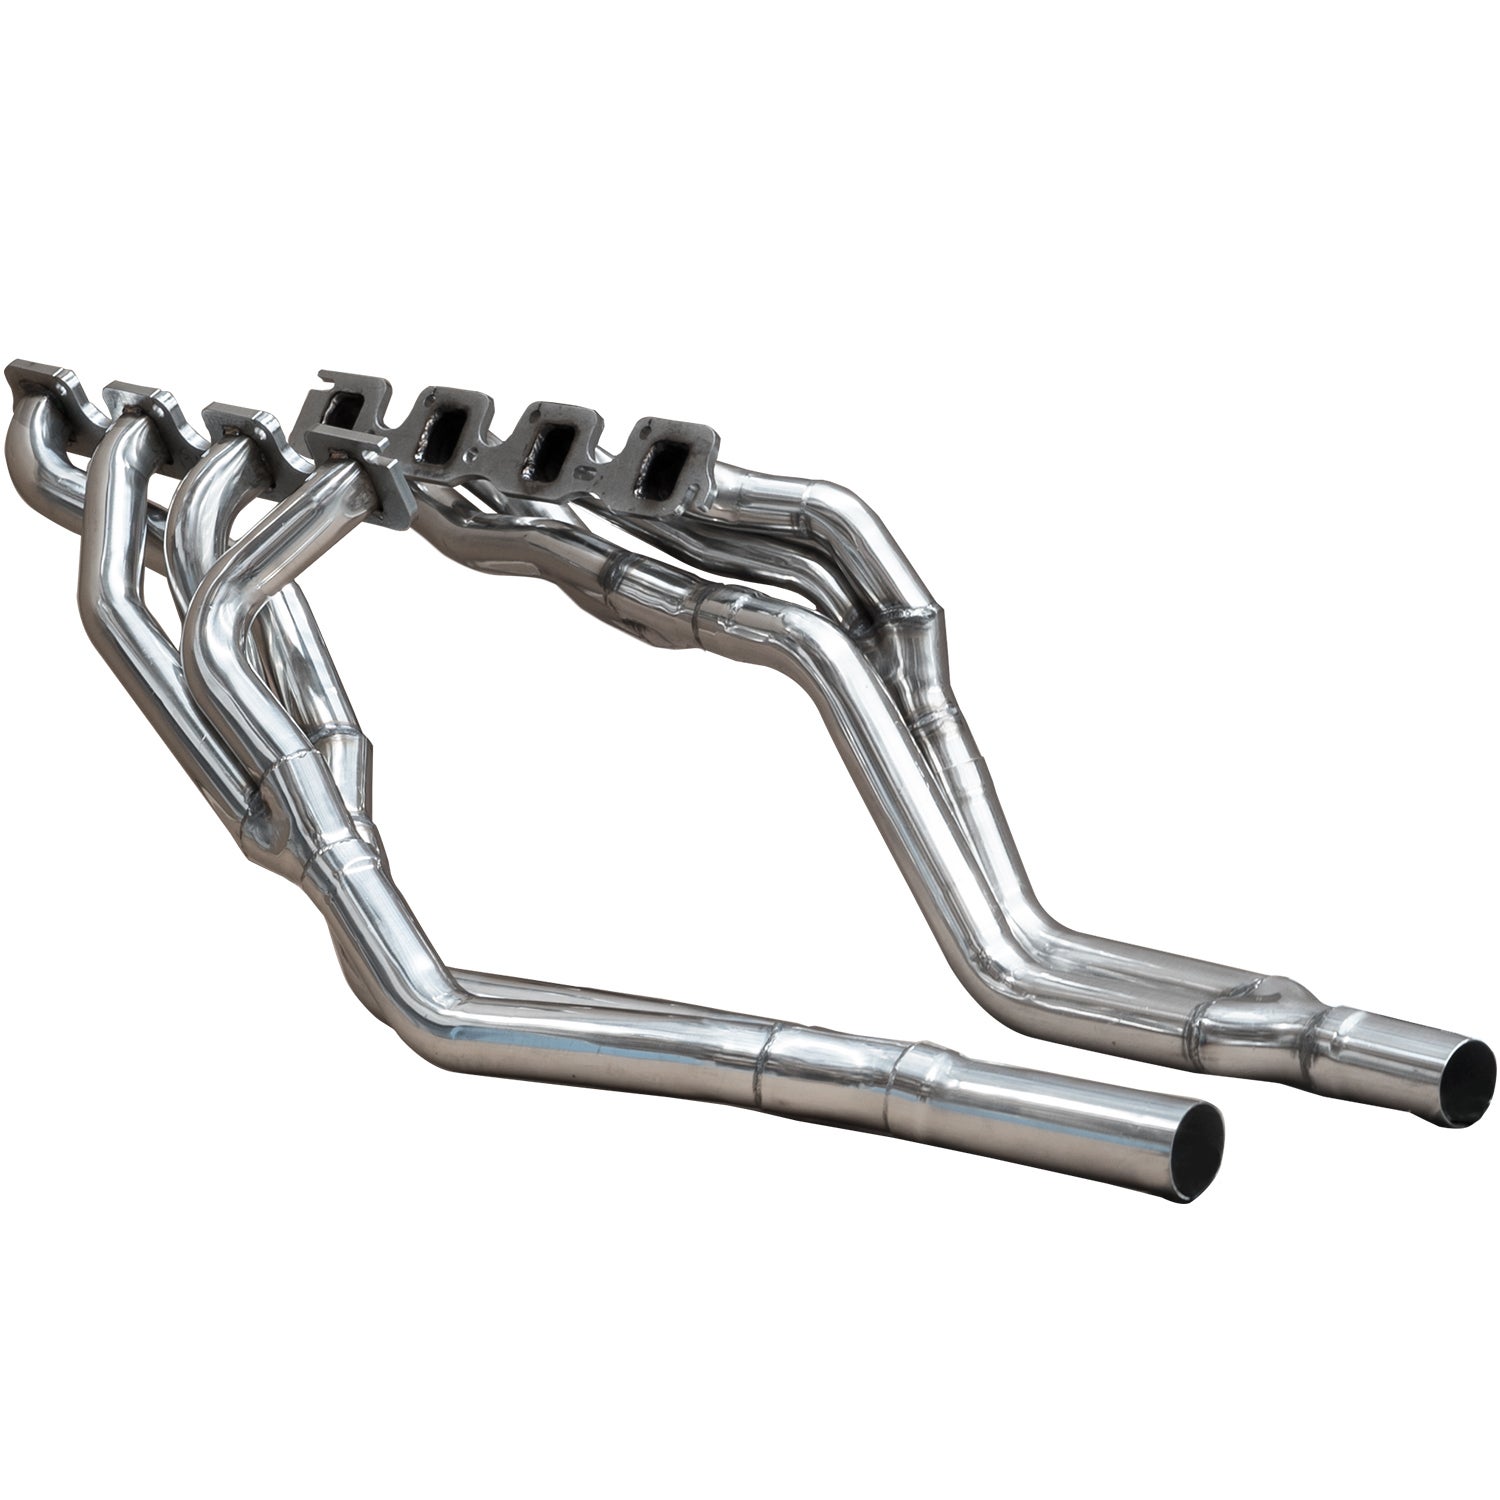 Proflow Exhaust Stainless Steel Extractors For Ford V8 XR To XF 4V Cleveland 302